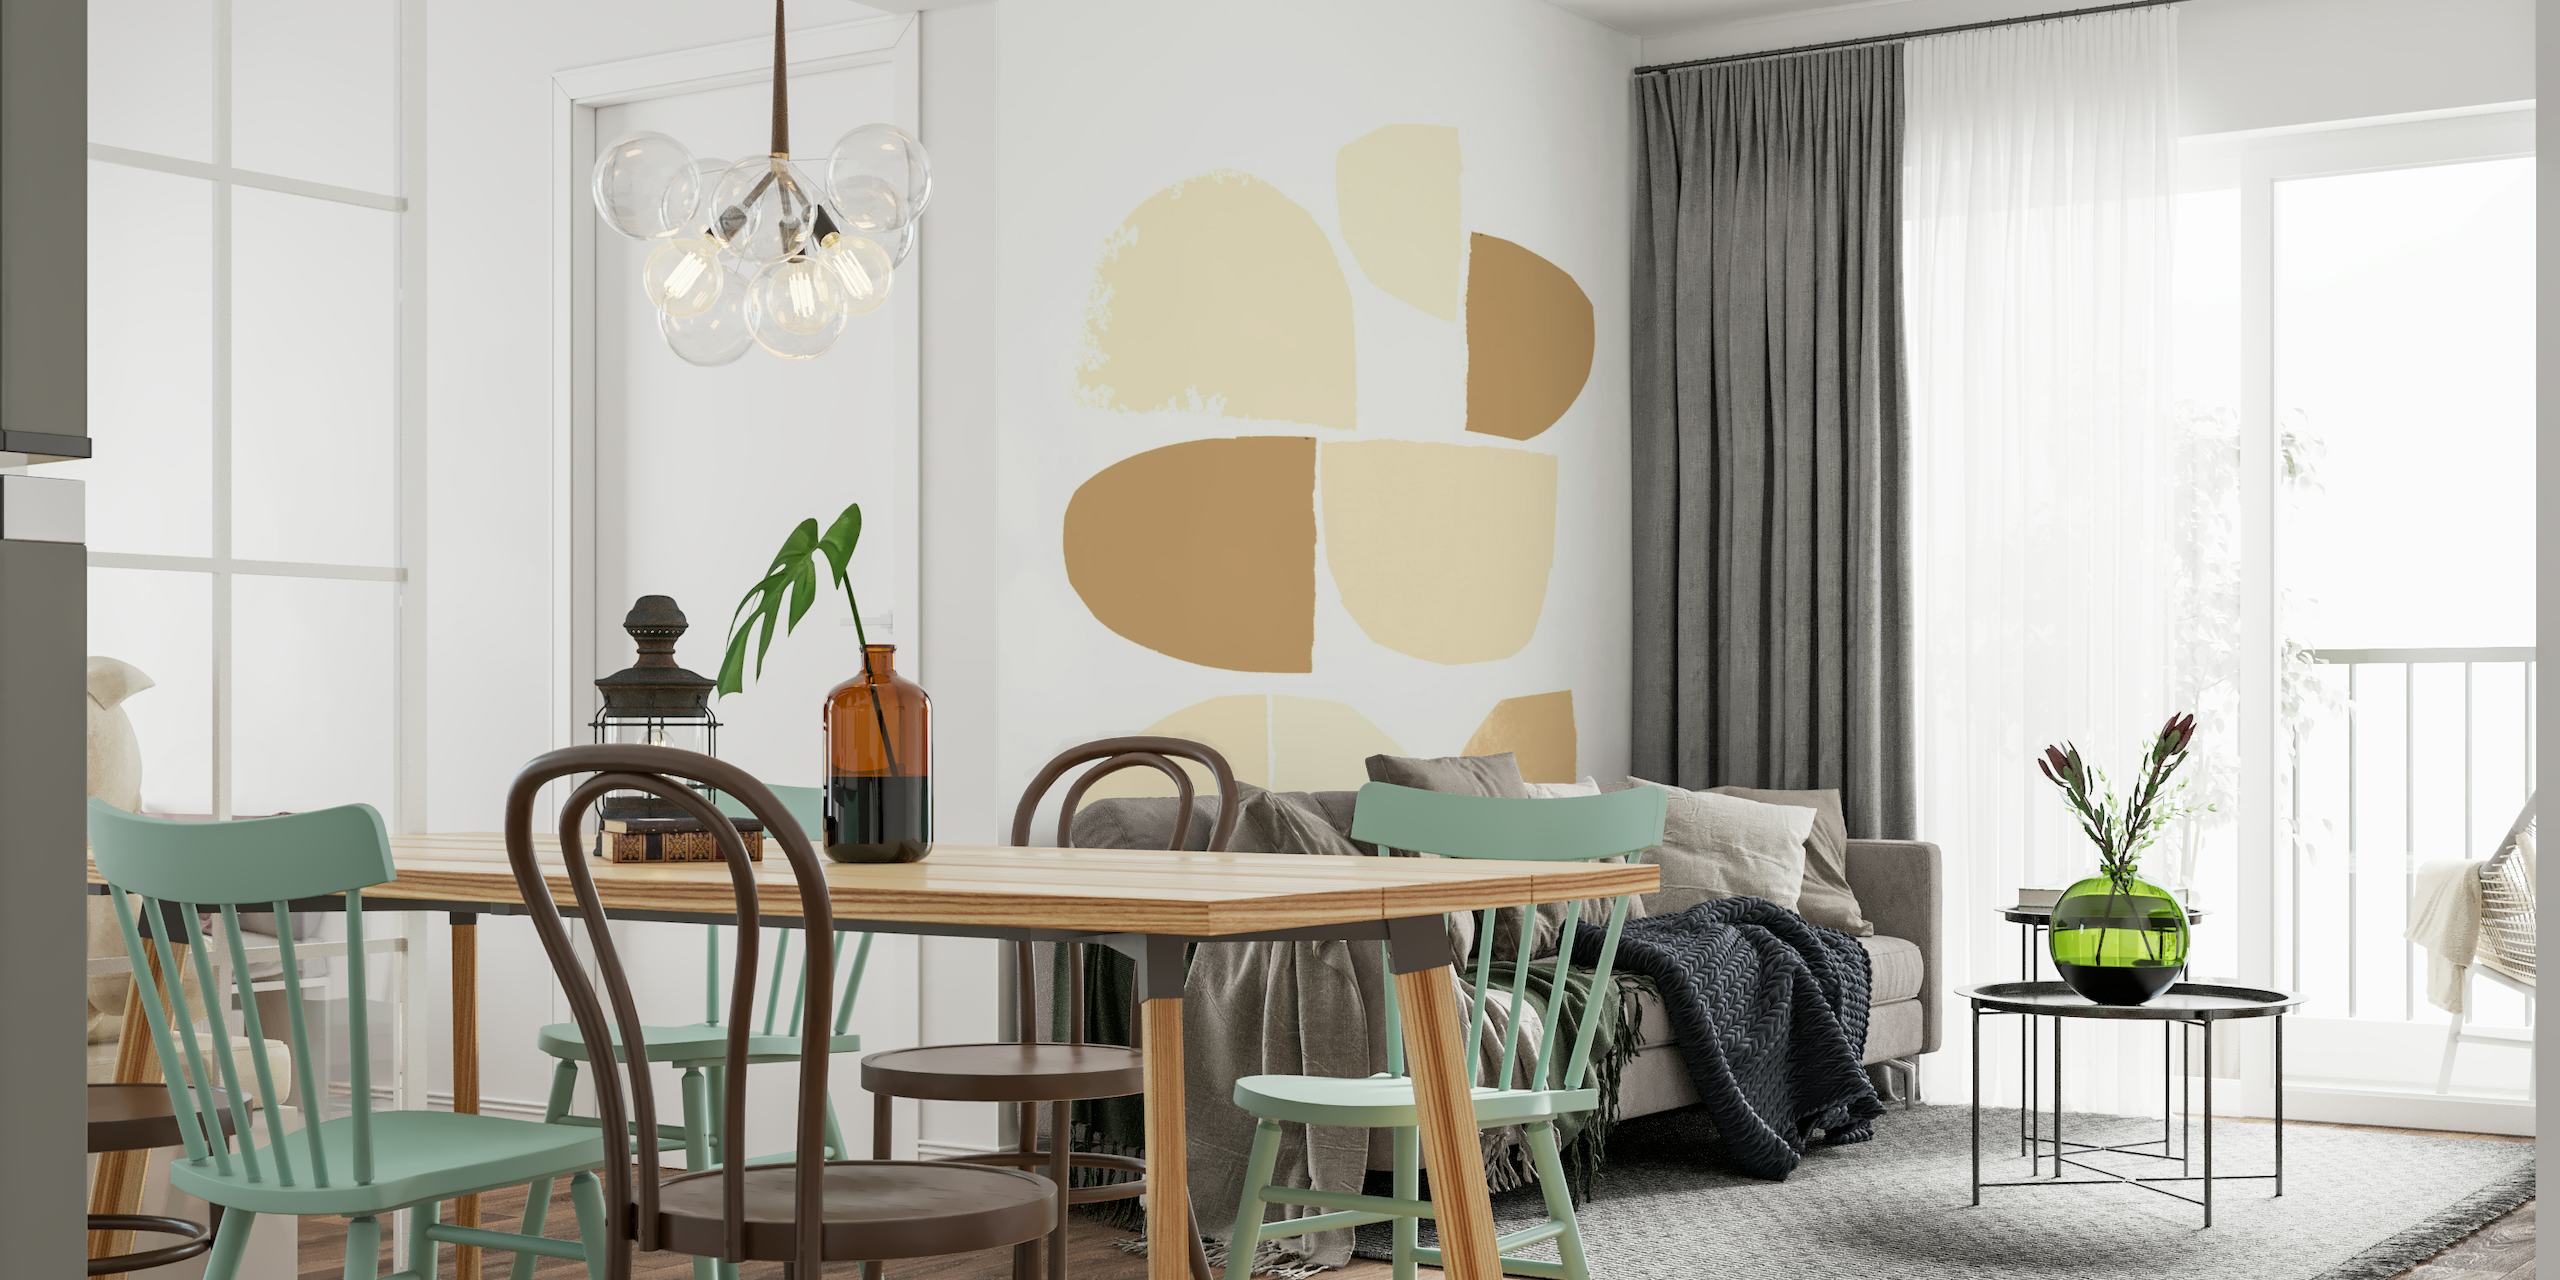 Abstract shapes in beige, cream, and tan for wall mural 'Minimalist Collage Neutral'